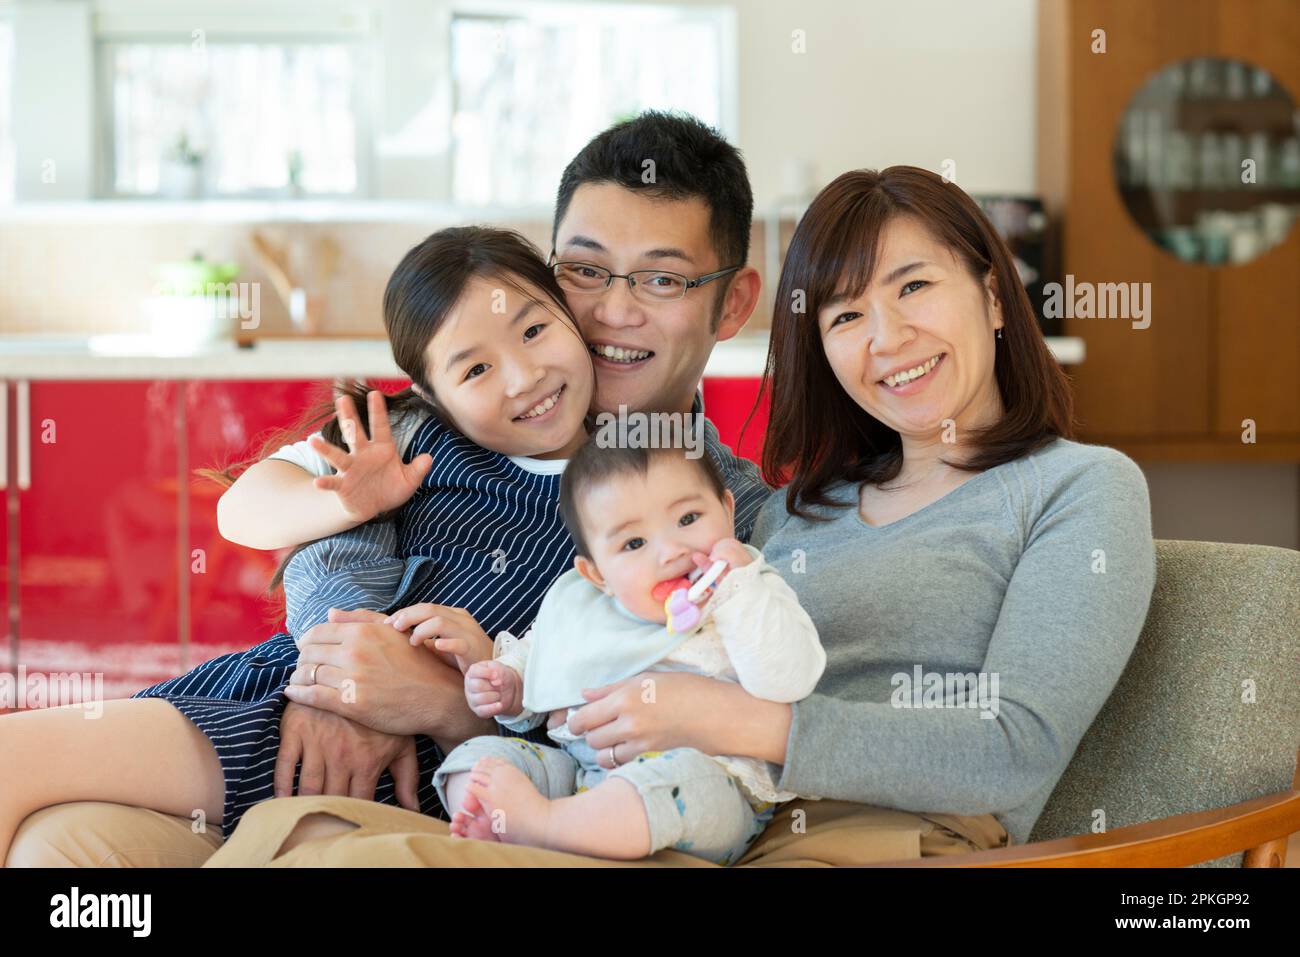 Family sitting on couch and smiling Stock Photo